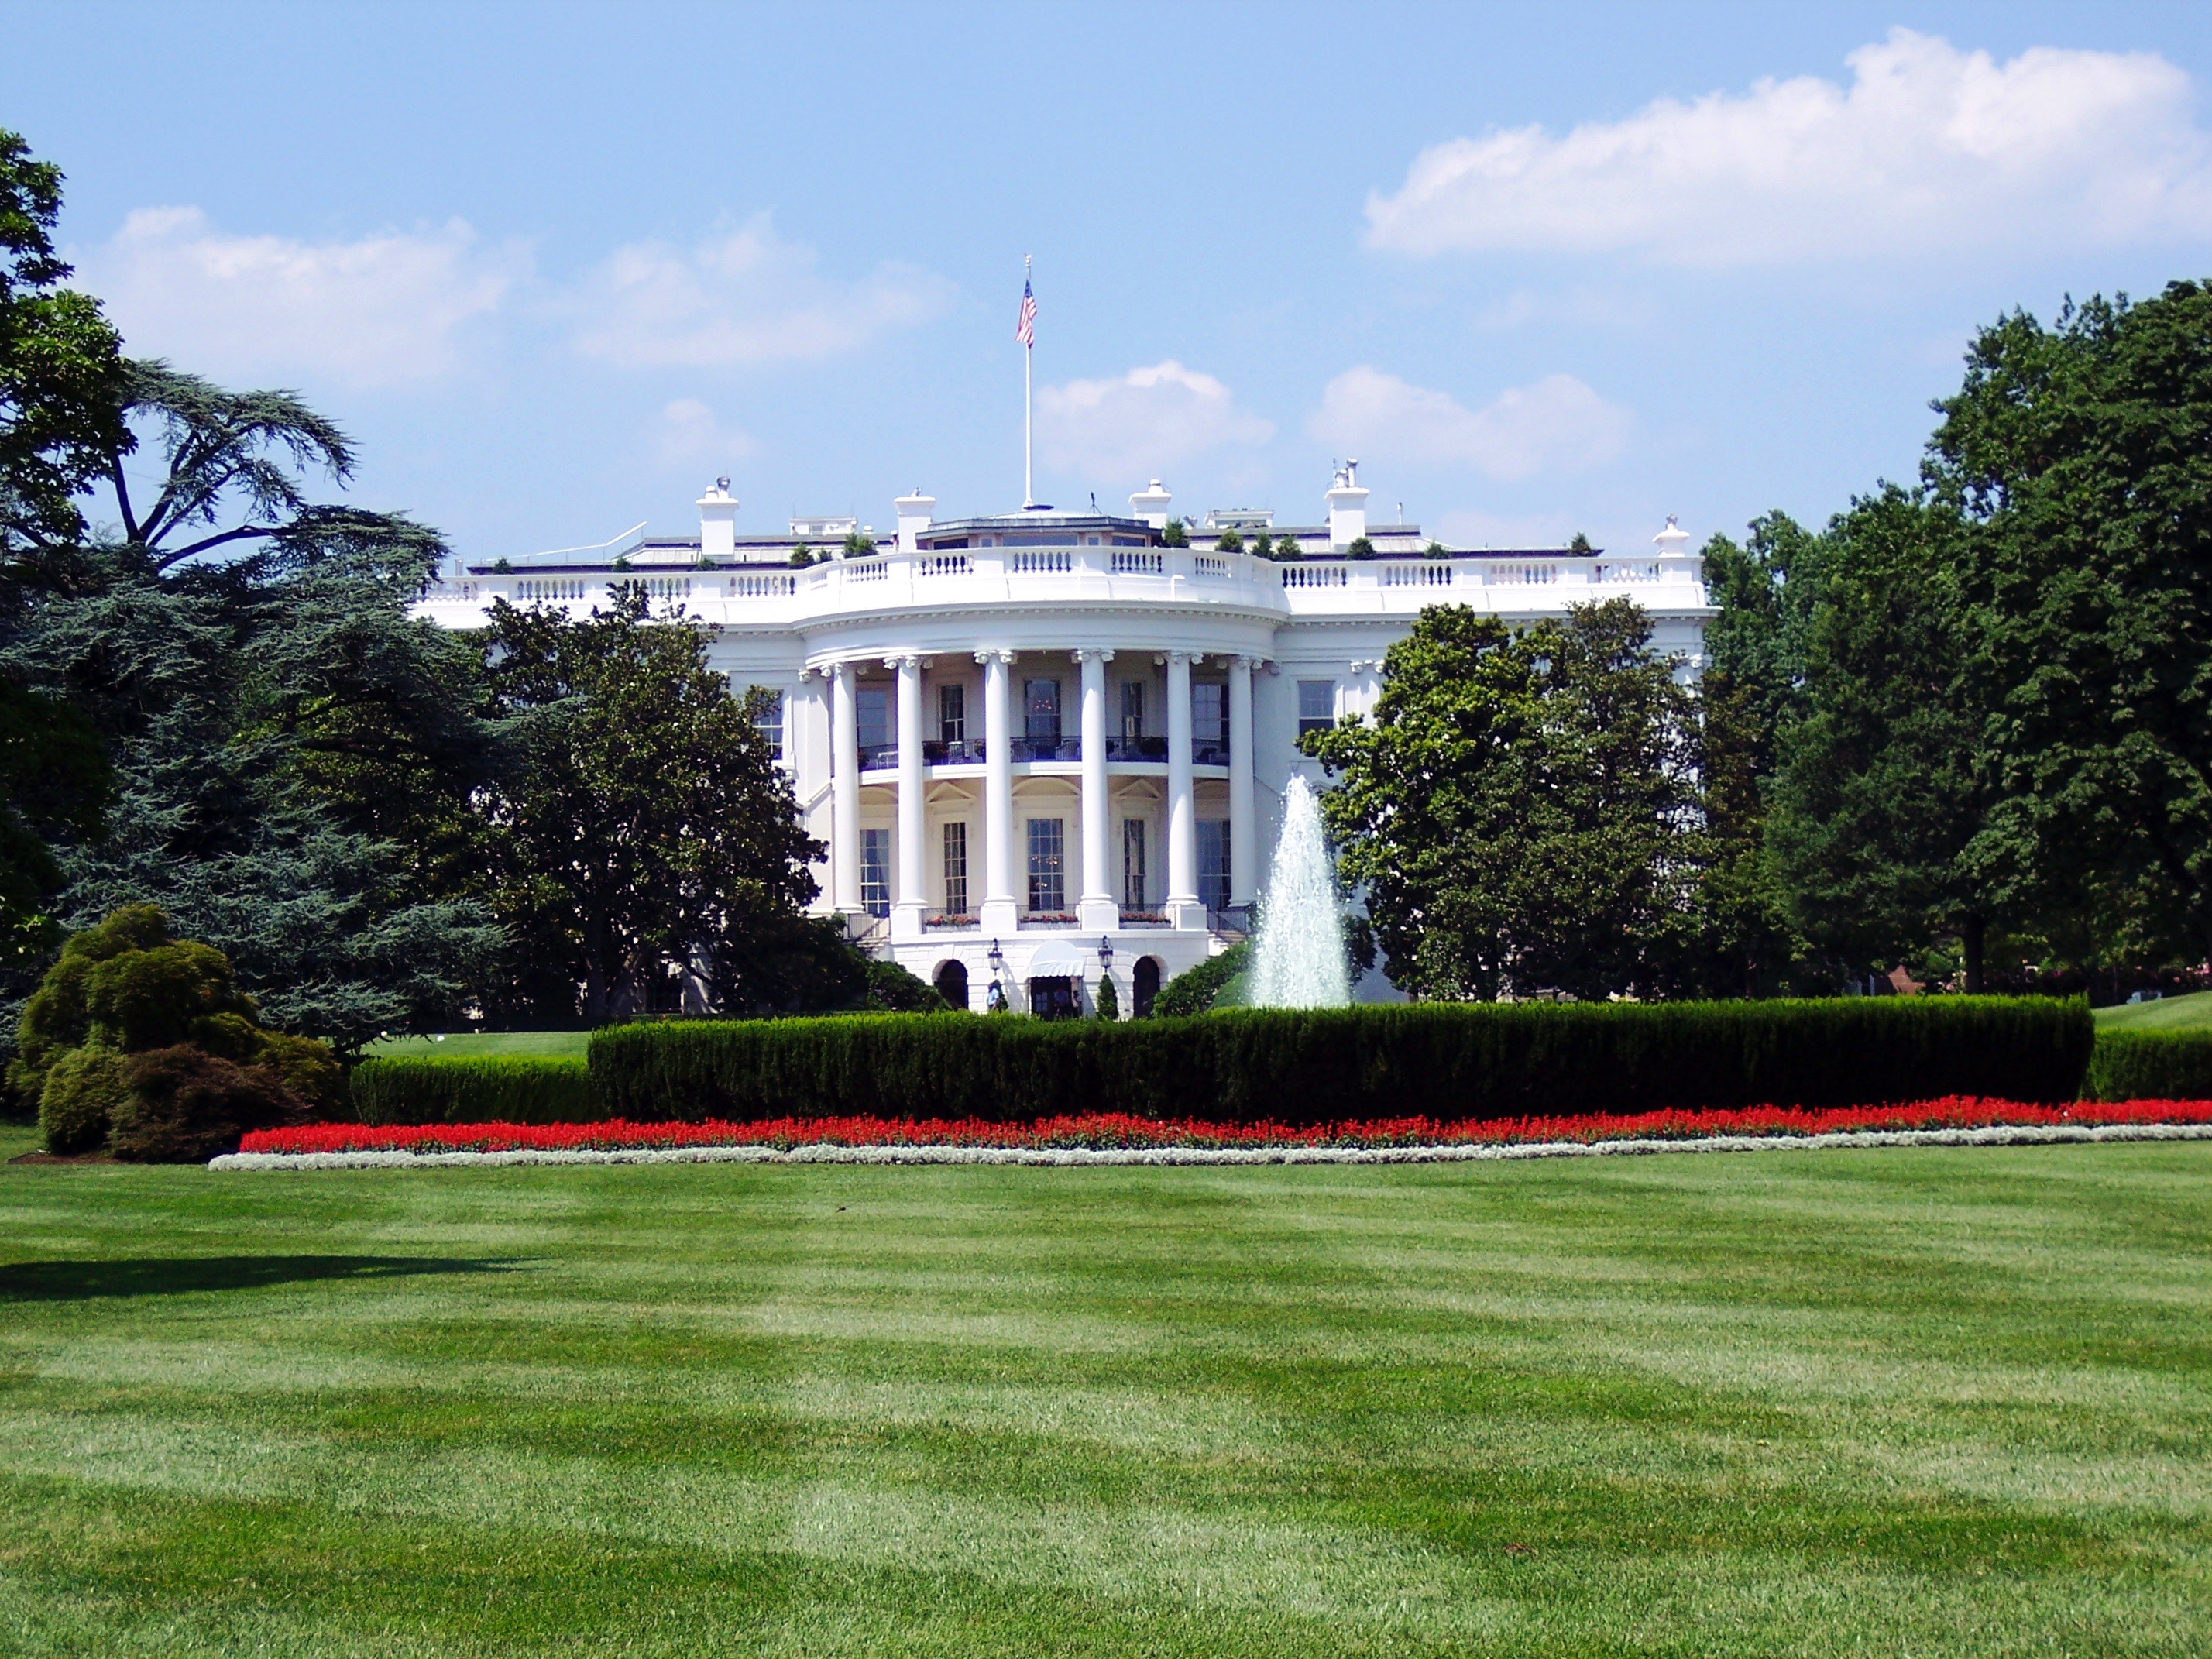 Exterior of the White House and it's lawn on a sunny day with a blue sky.